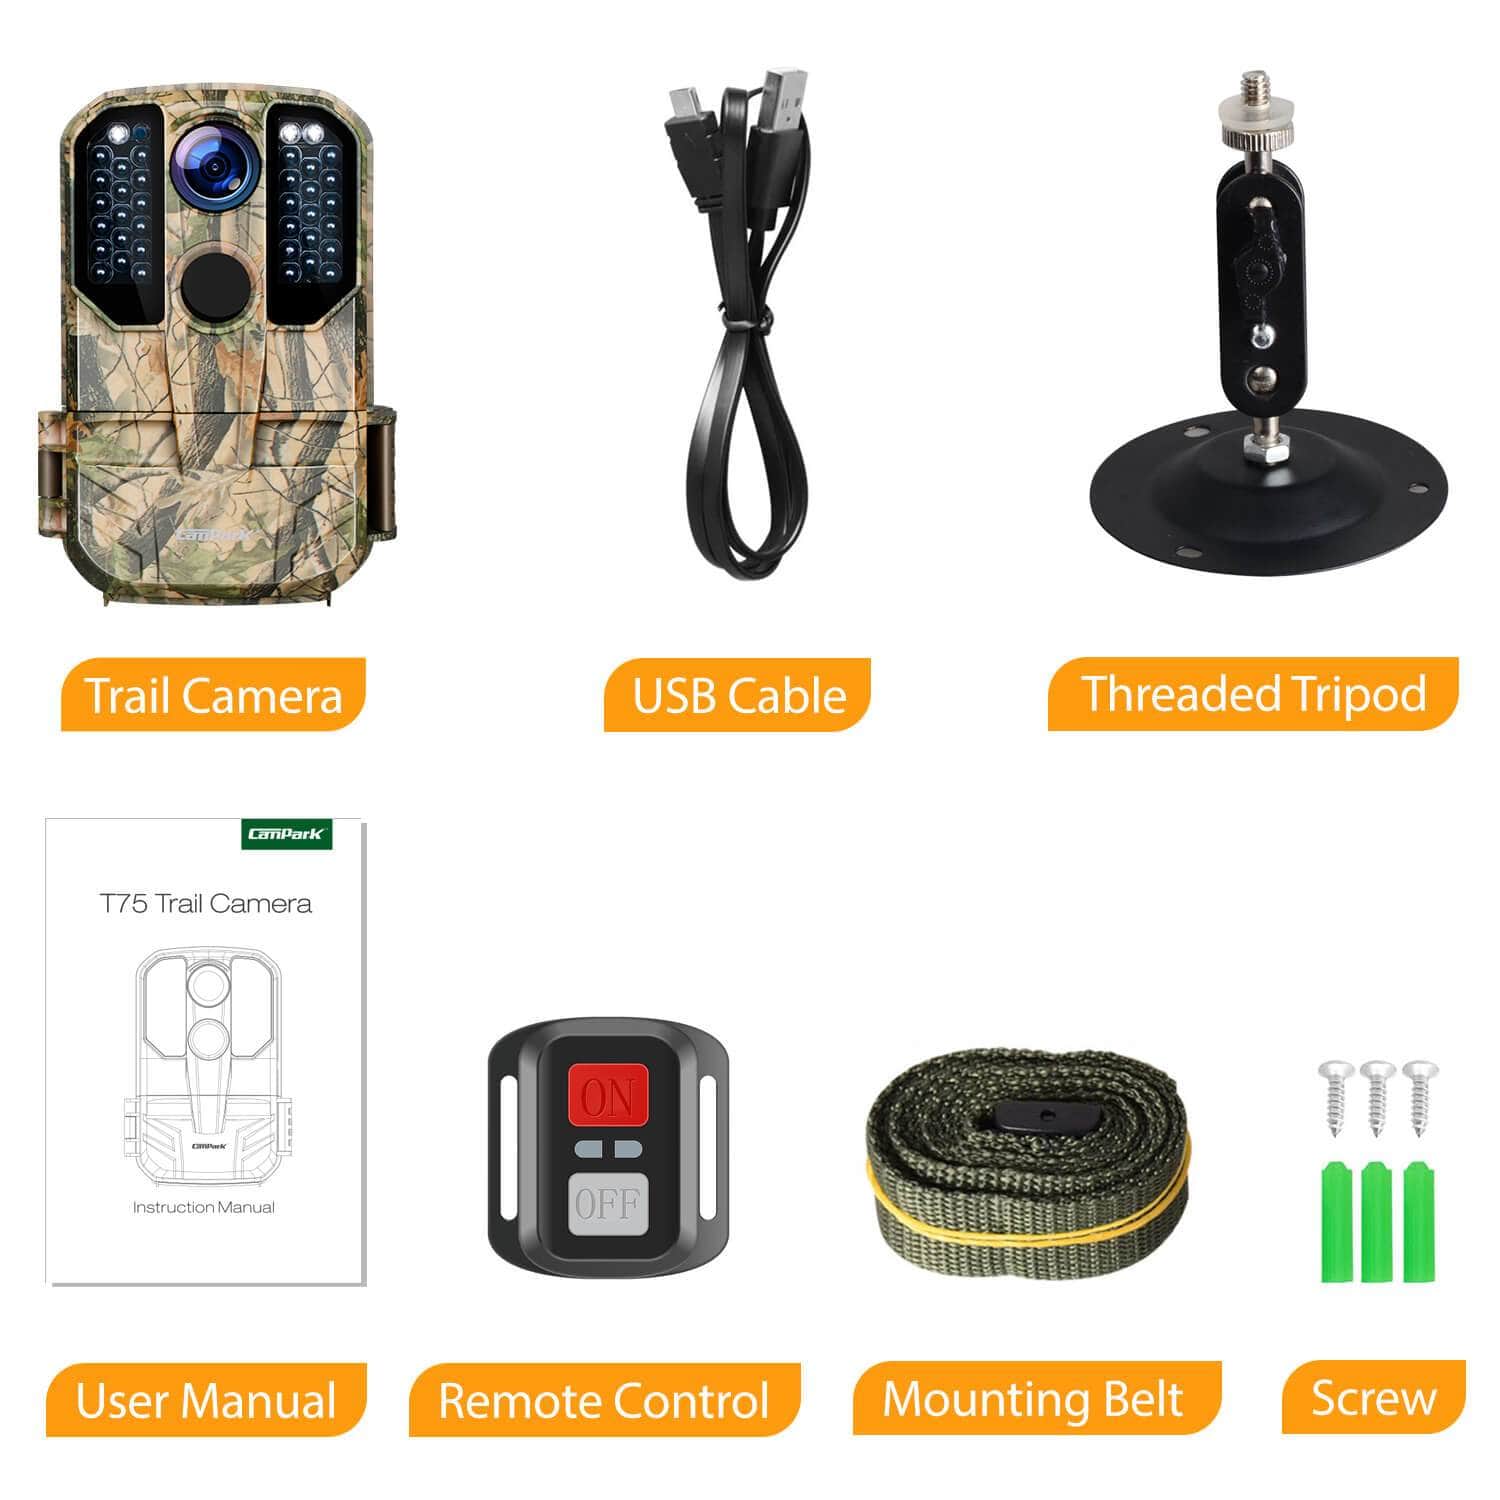 Campark T75 Trail Camera package